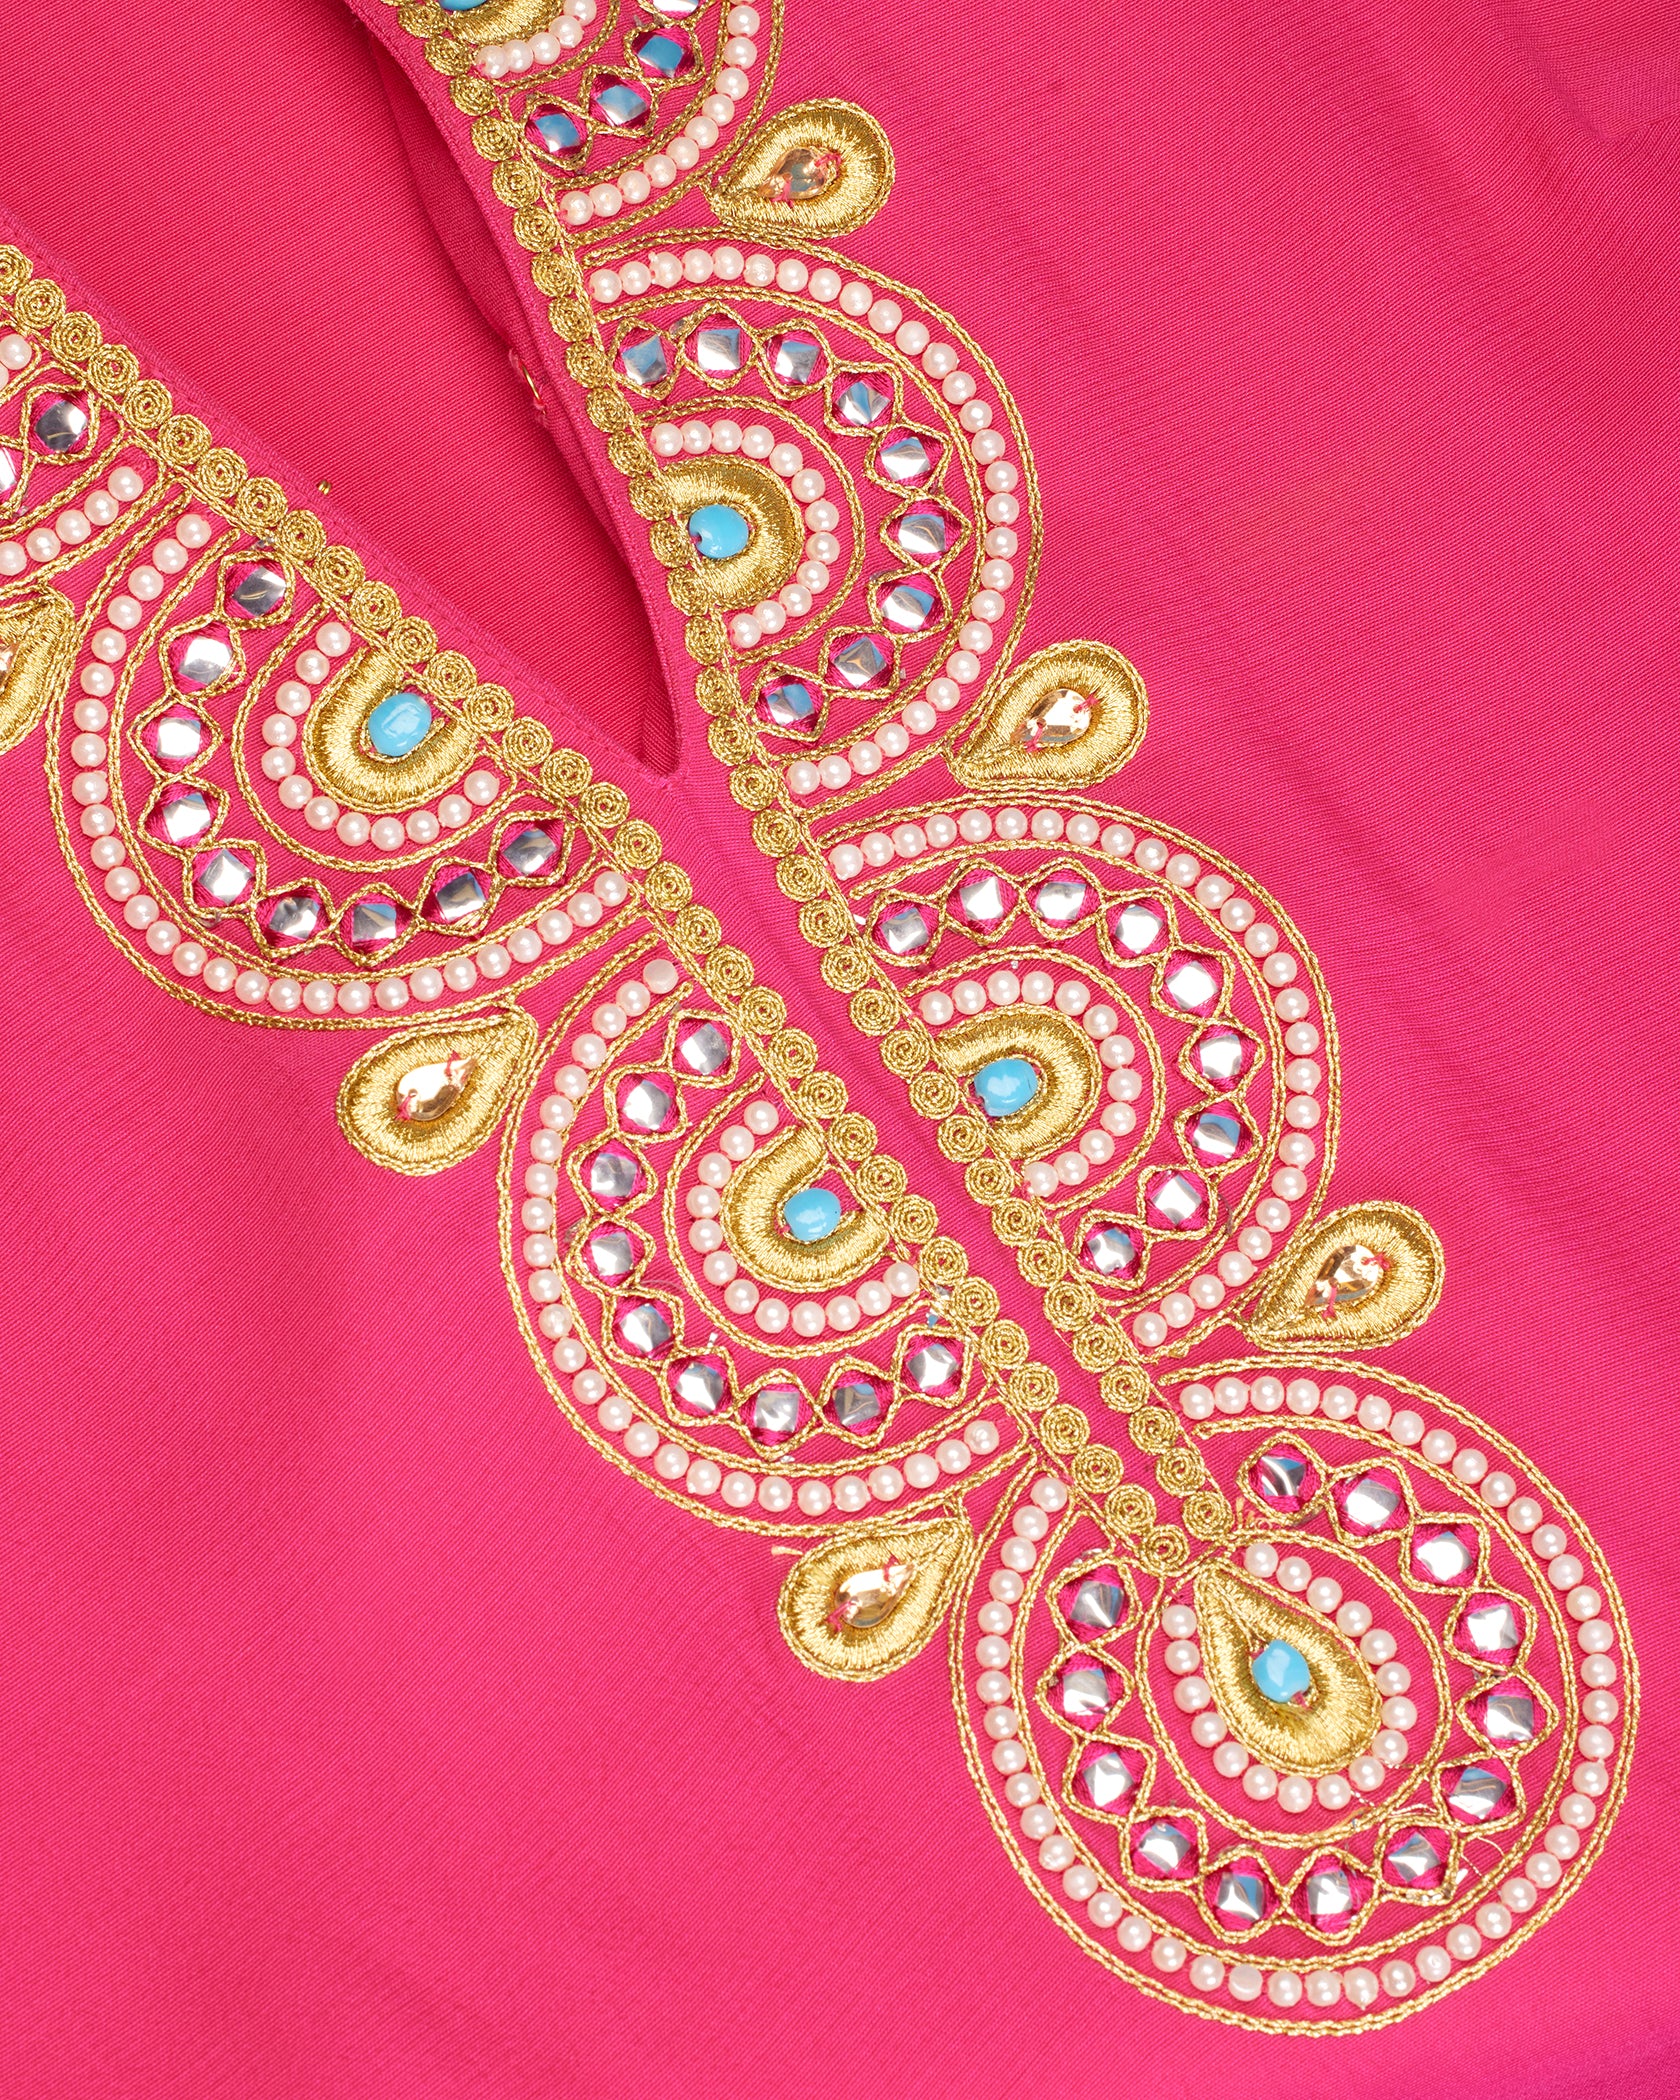 Noor Long Fuchsia Tunic Dress with Gold Embellishment-Detail of Hand Embellishment